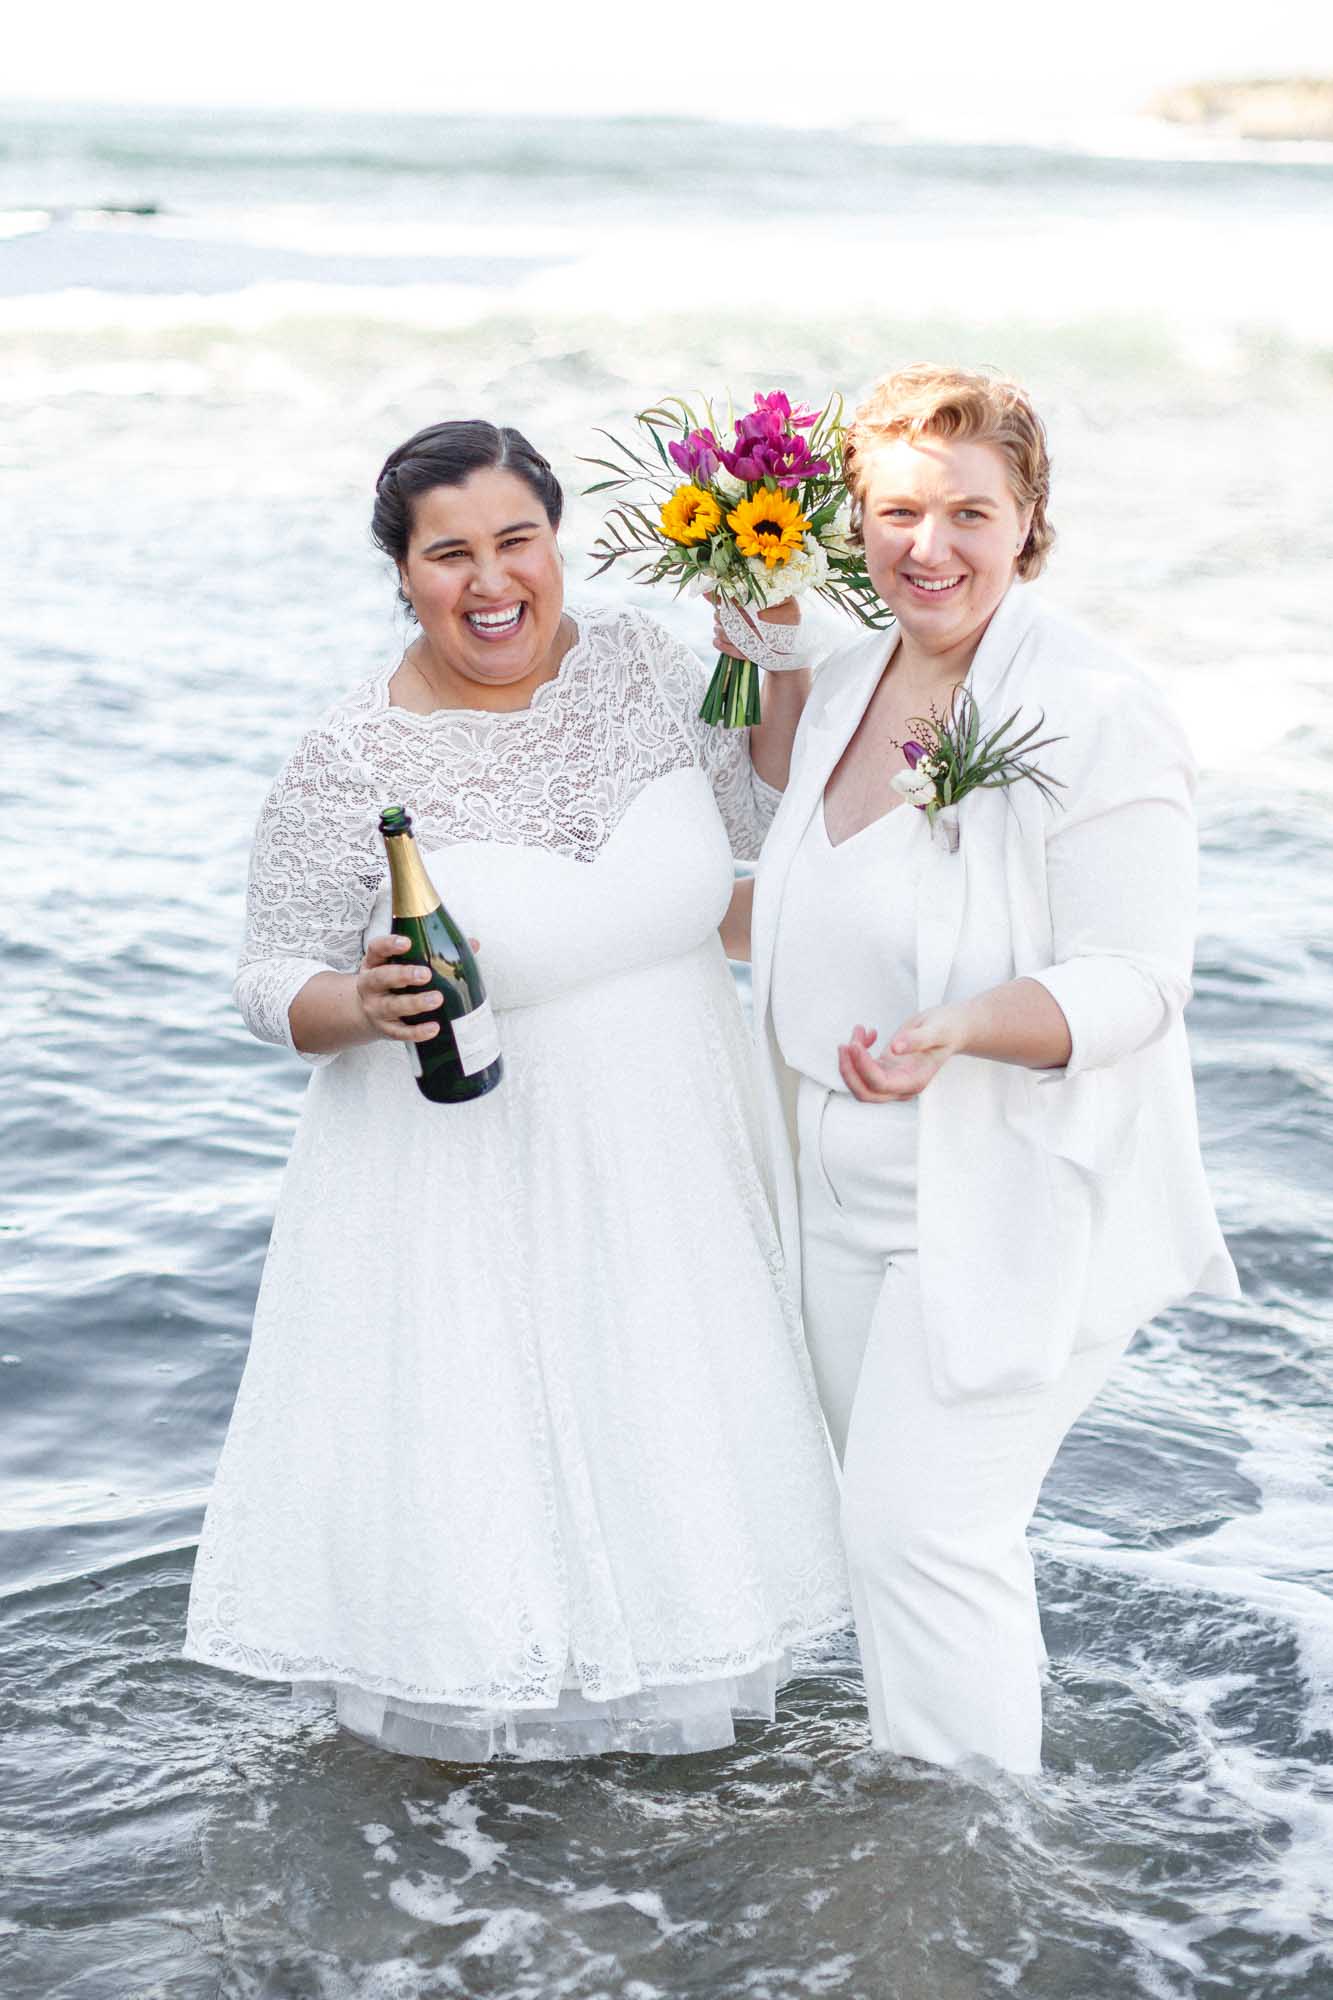 Santa Cruz courthouse elopement followed by beach photos | Delgado Photo Co | Featured on Equally Wed, the leading LGBTQ+ wedding magazine